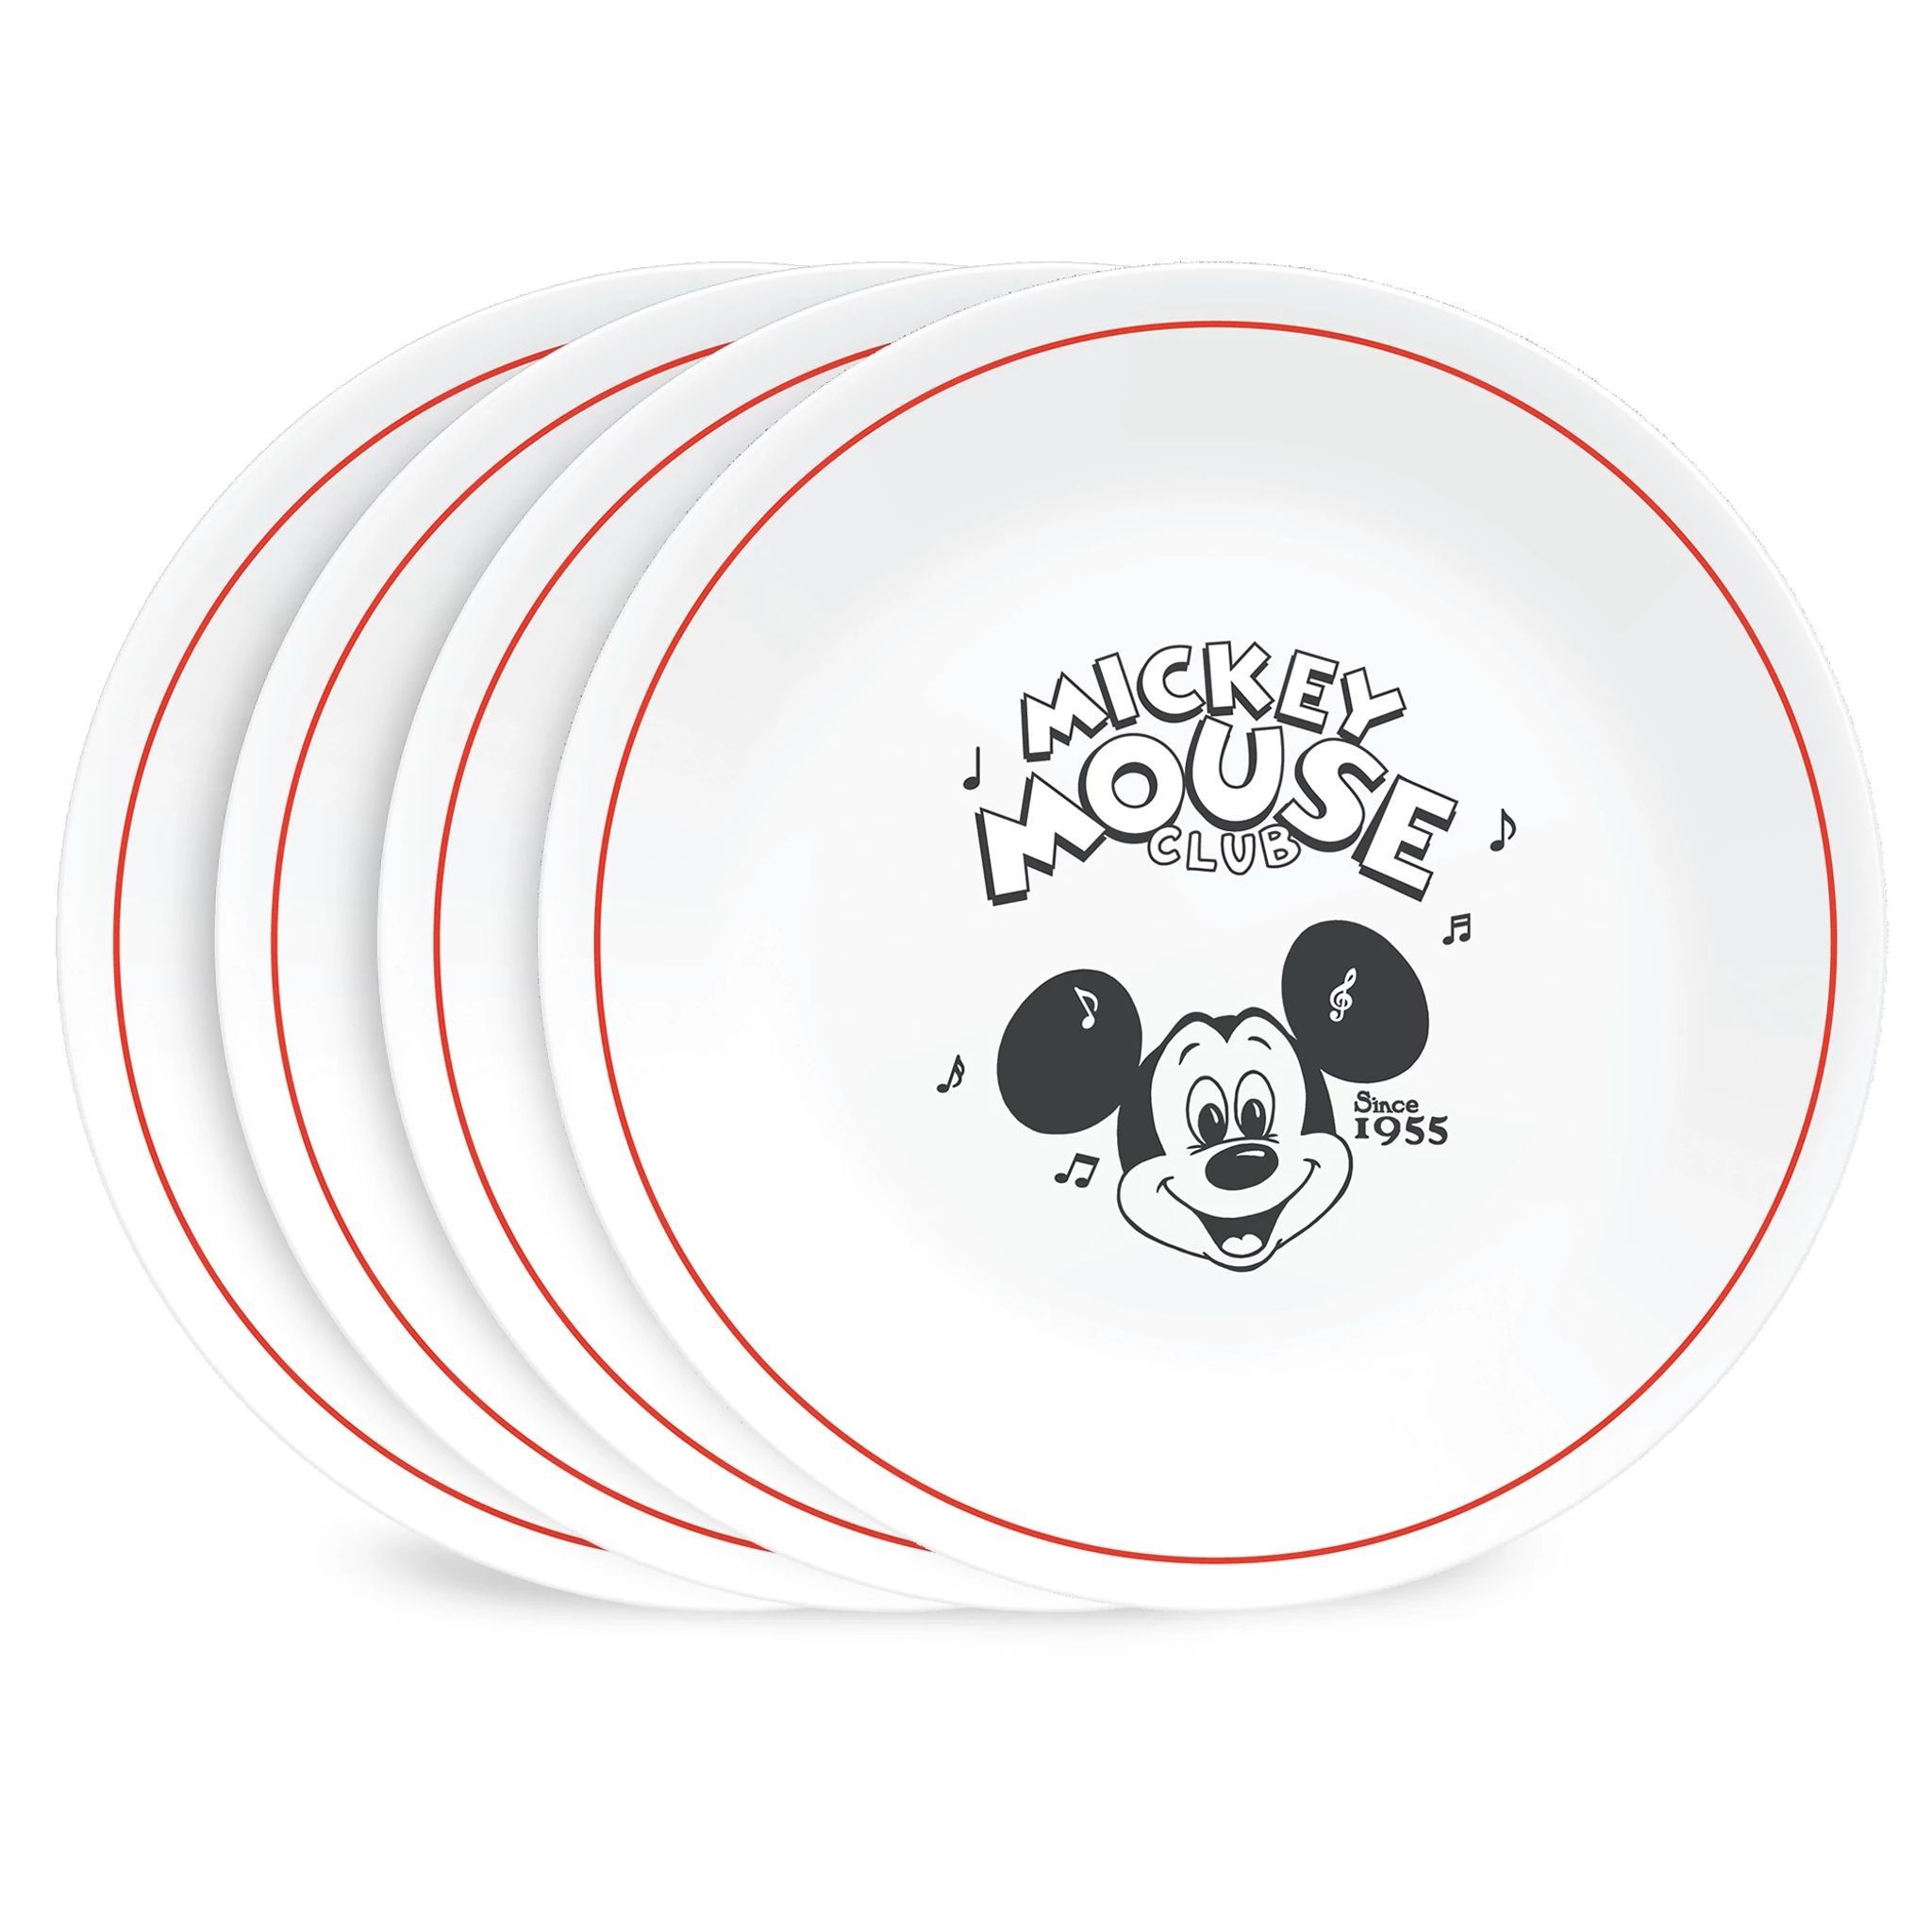 Corelle Has New Special Edition Mickey Mouse Plates